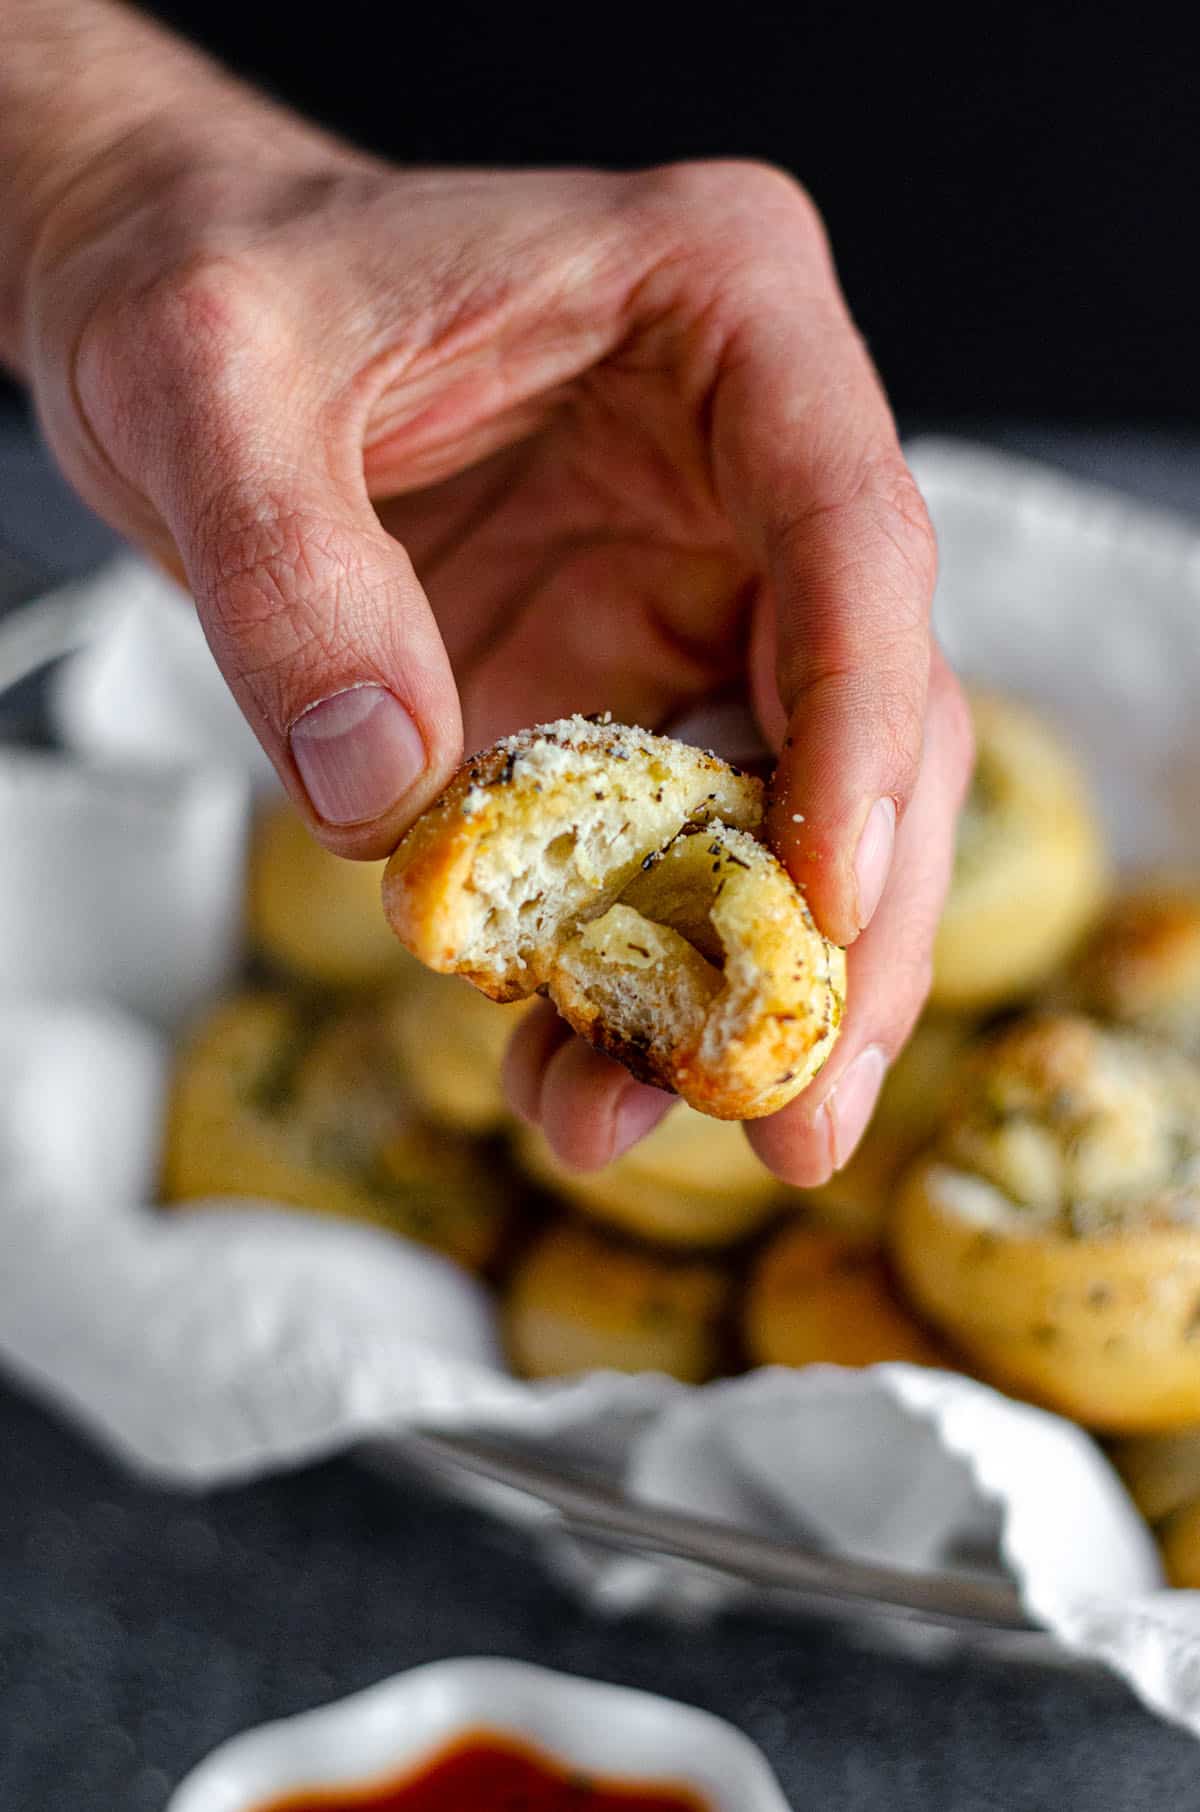 hand holding a homemade garlic knot with a bite taken out of it